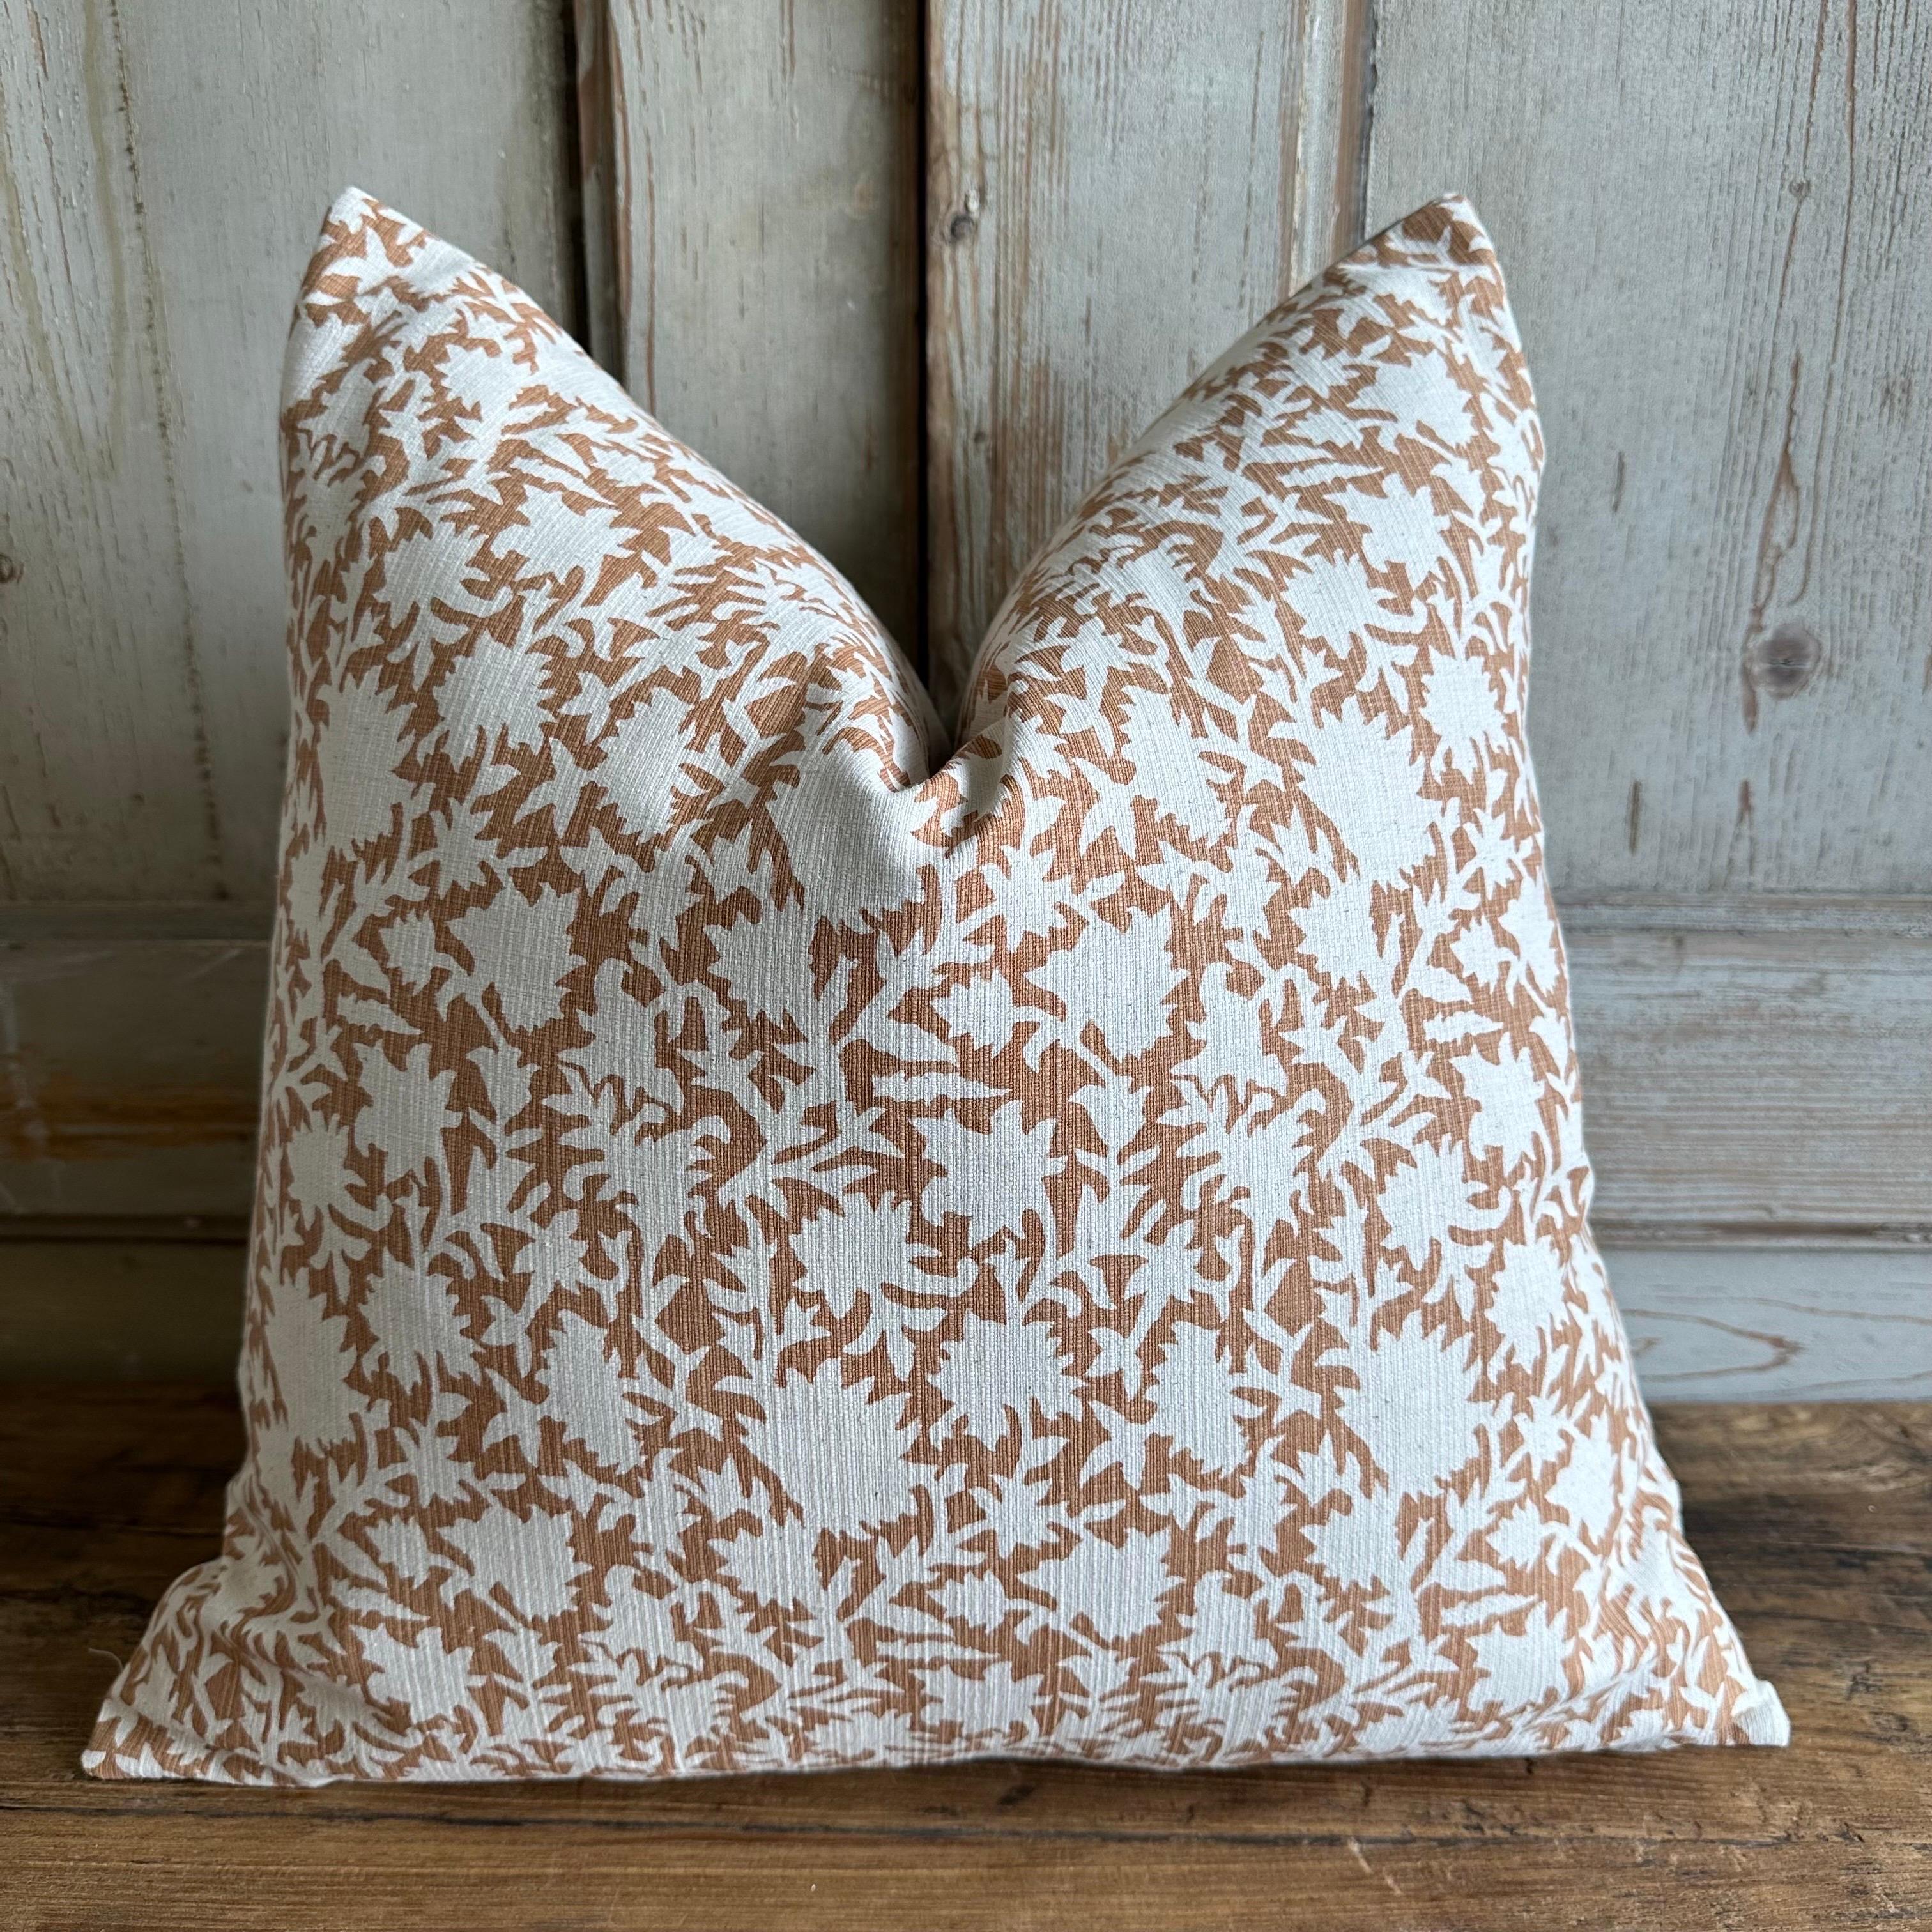 Custom made linen hand blocked pillow with down feather insert
Size: 21 x21
A soft apricot face with white floral and trailing leaves
Backing is flax natural linen, with hidden zipper closure.
Machine wash cold.
Lay flat to dry.
Iron inside